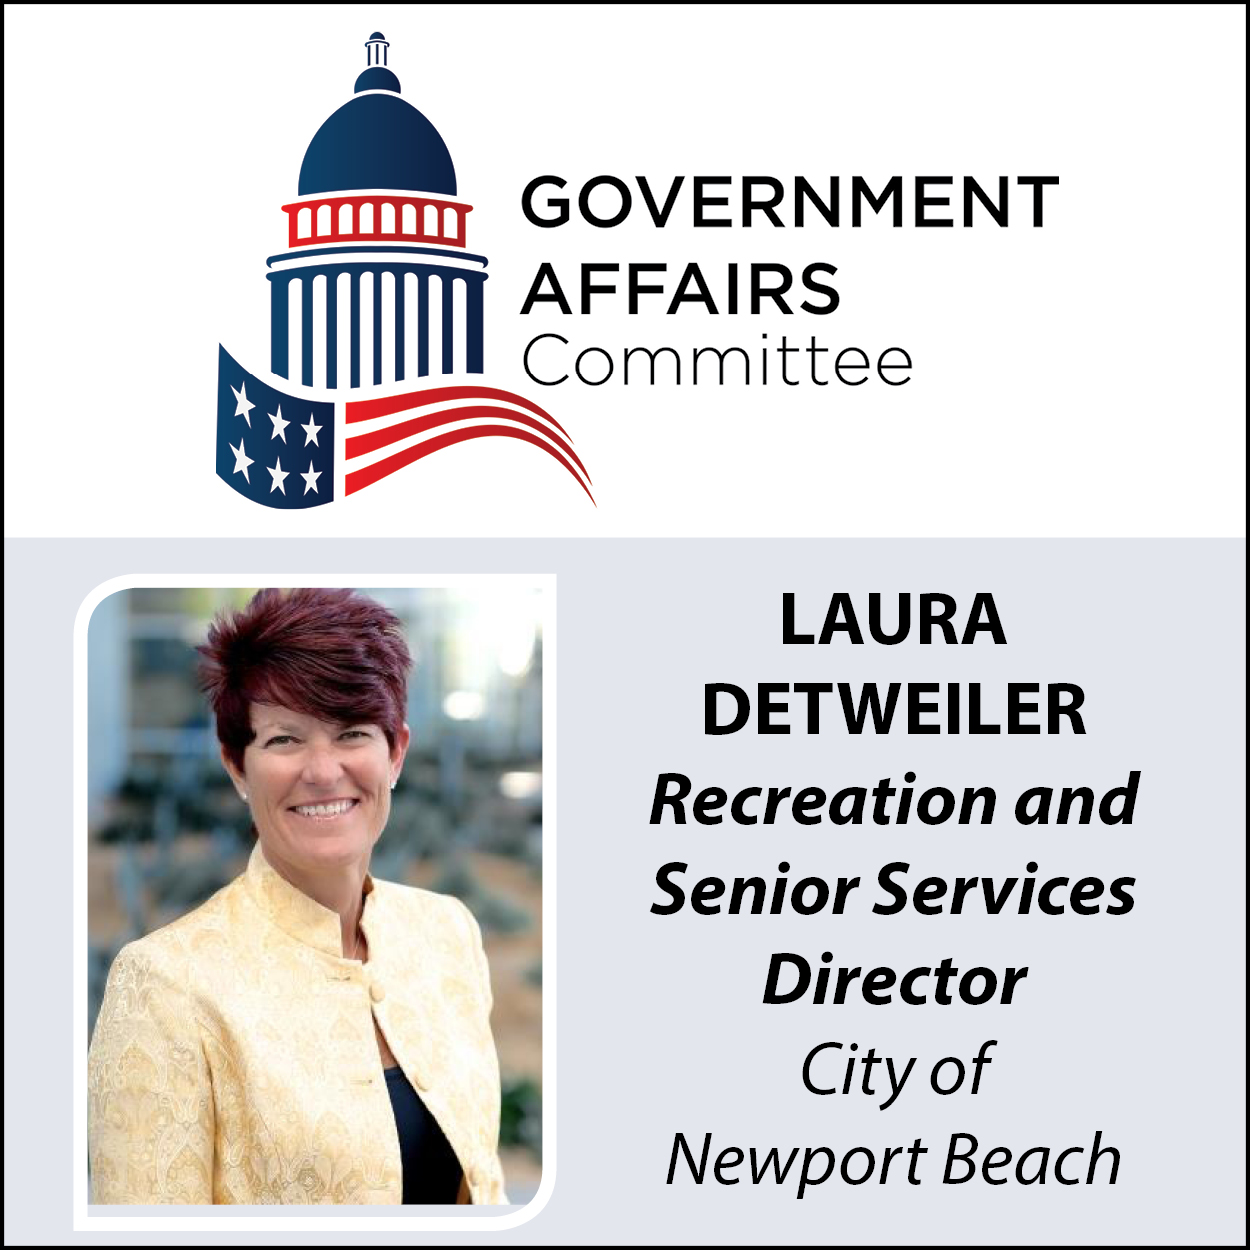 May Government Affairs Committee: City Recreation and Senior Service Update with Laura Detweiler